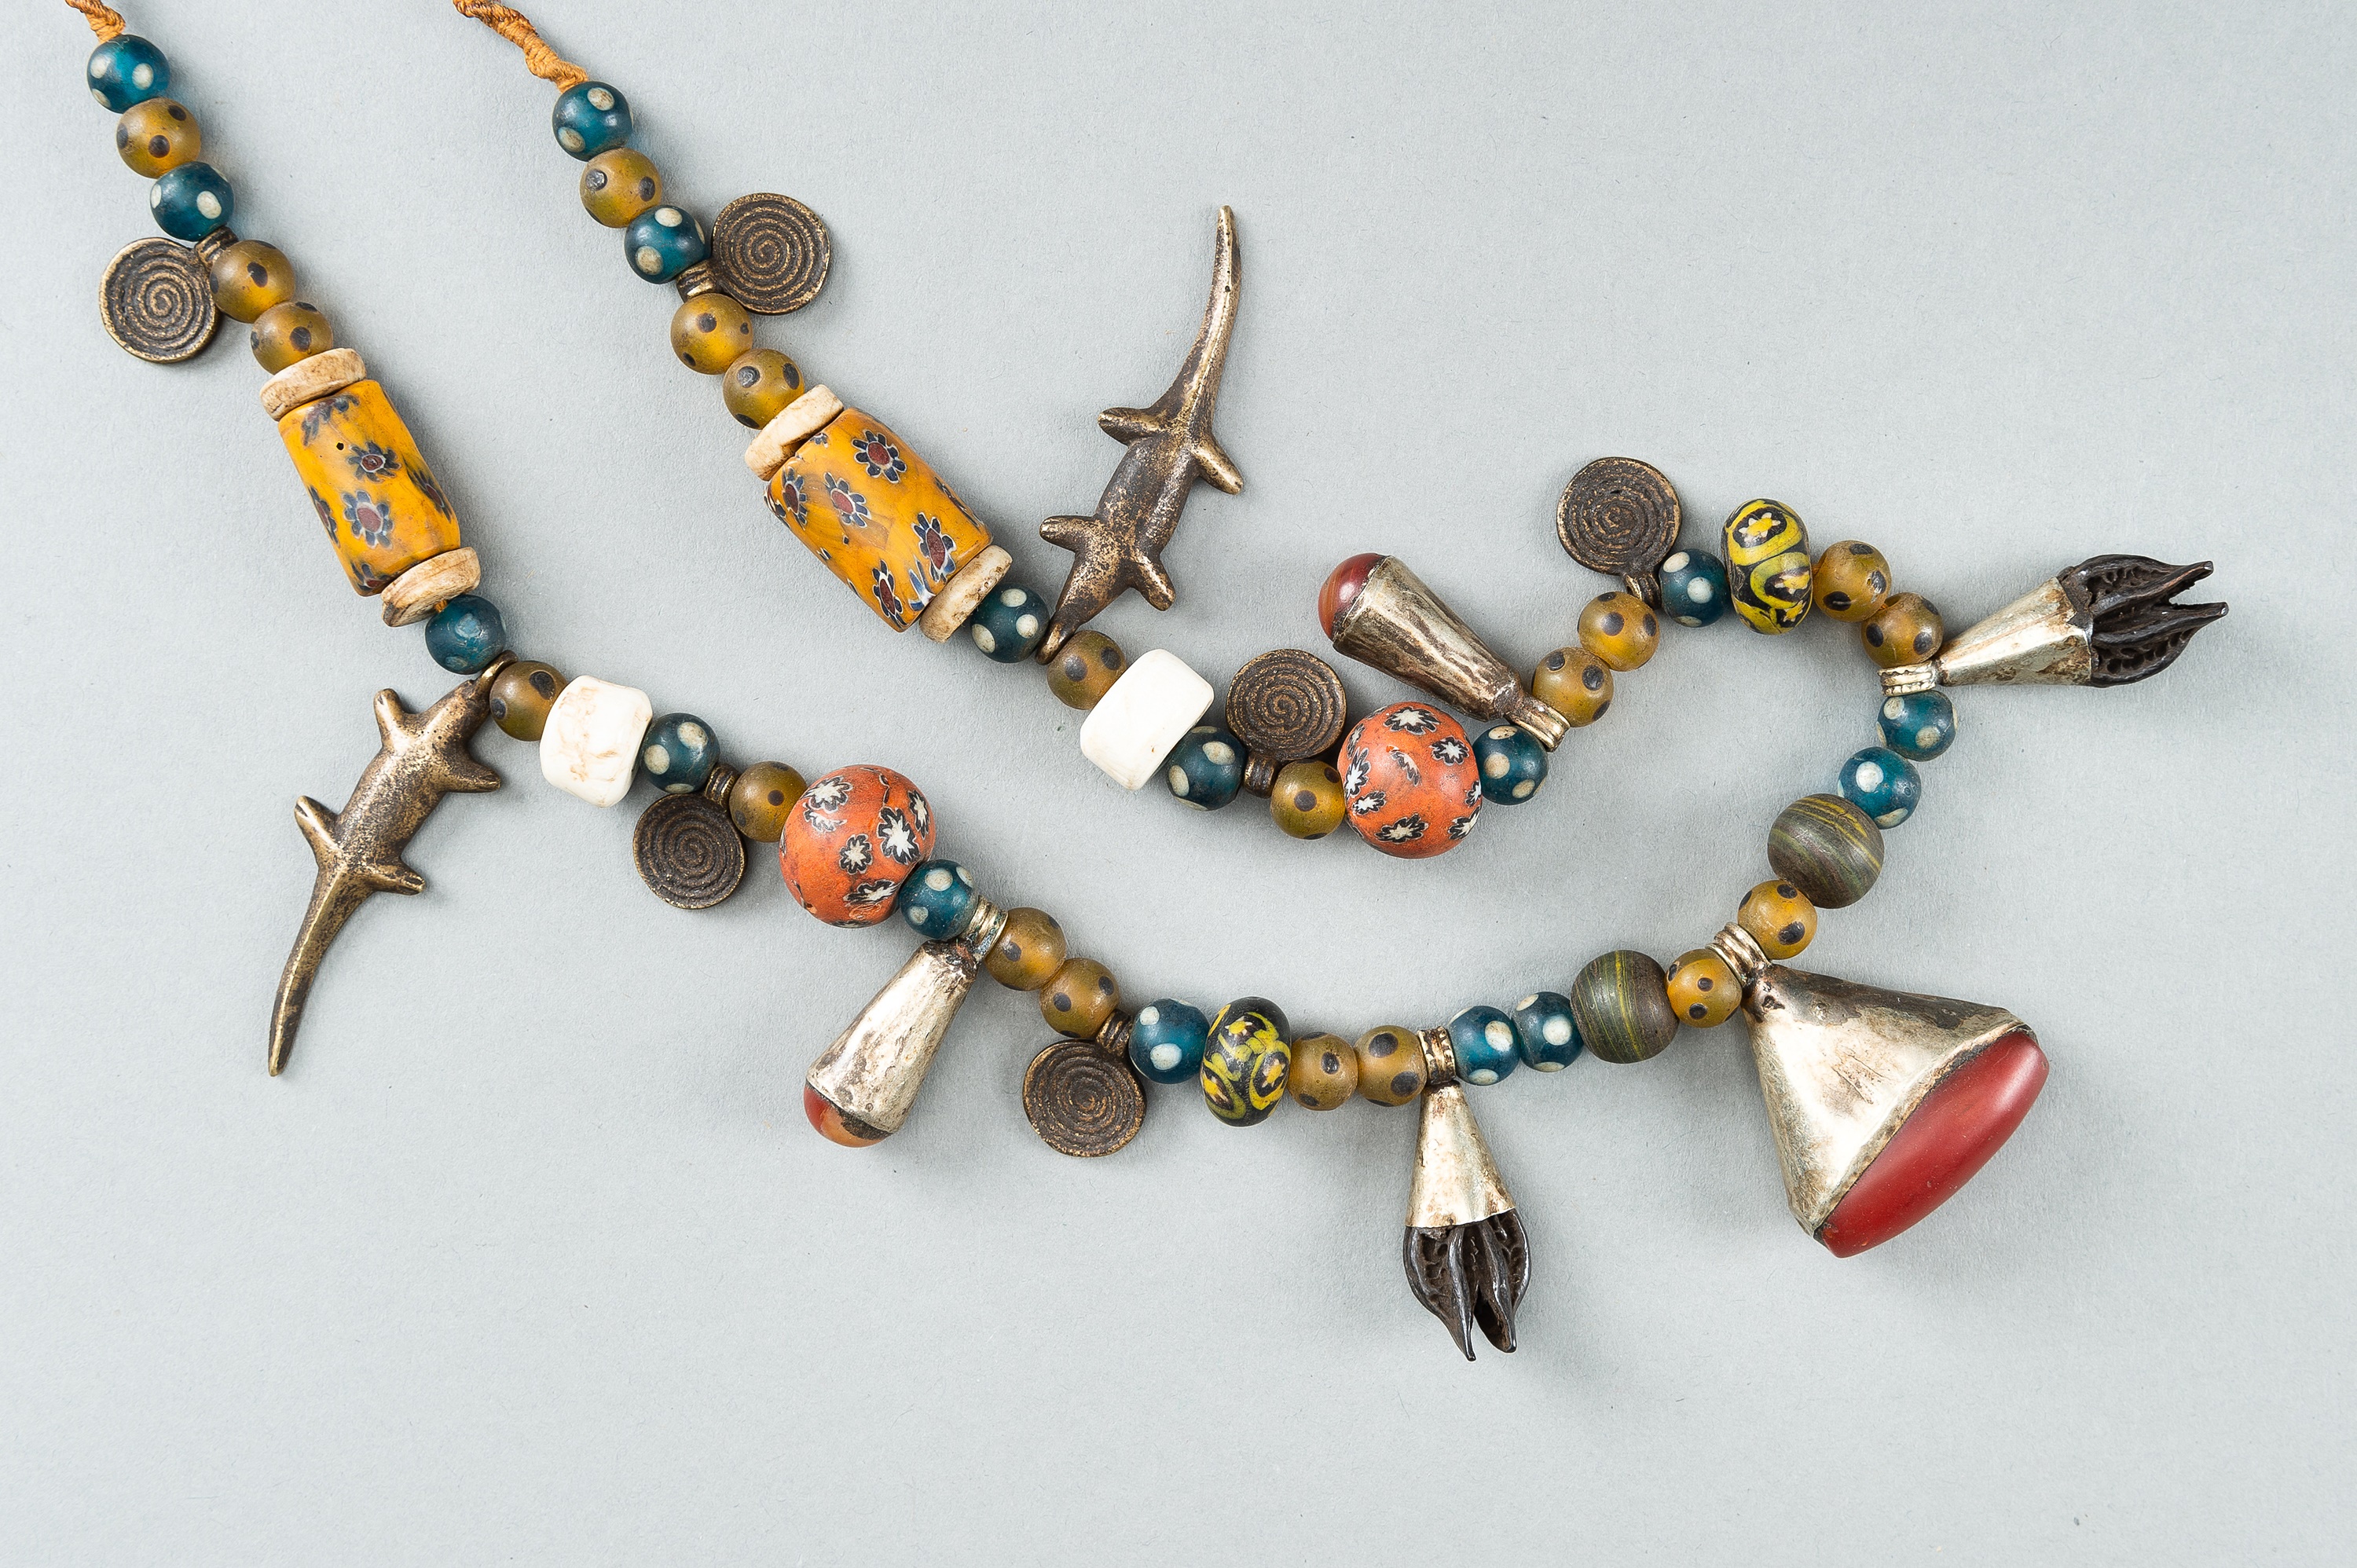 A NAGALAND MULTI-COLORED GLASS, BRASS AND SHELL NECKLACE, c. 1900s - Image 14 of 17